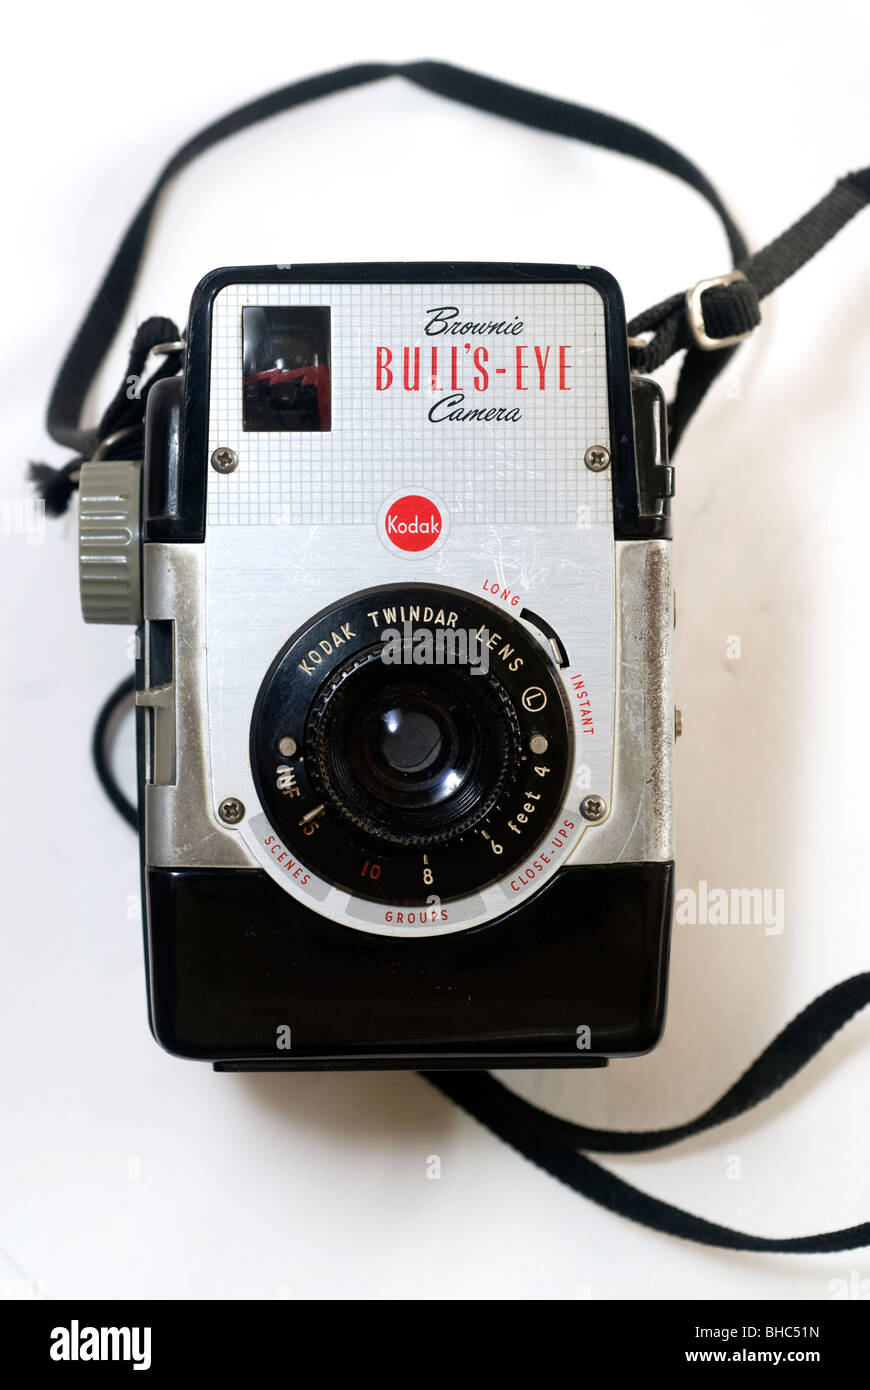 A Kodak Brownie Bulls-Eye camera dating from the 1950's. The camera uses the now discontinued 620 size film. Stock Photo